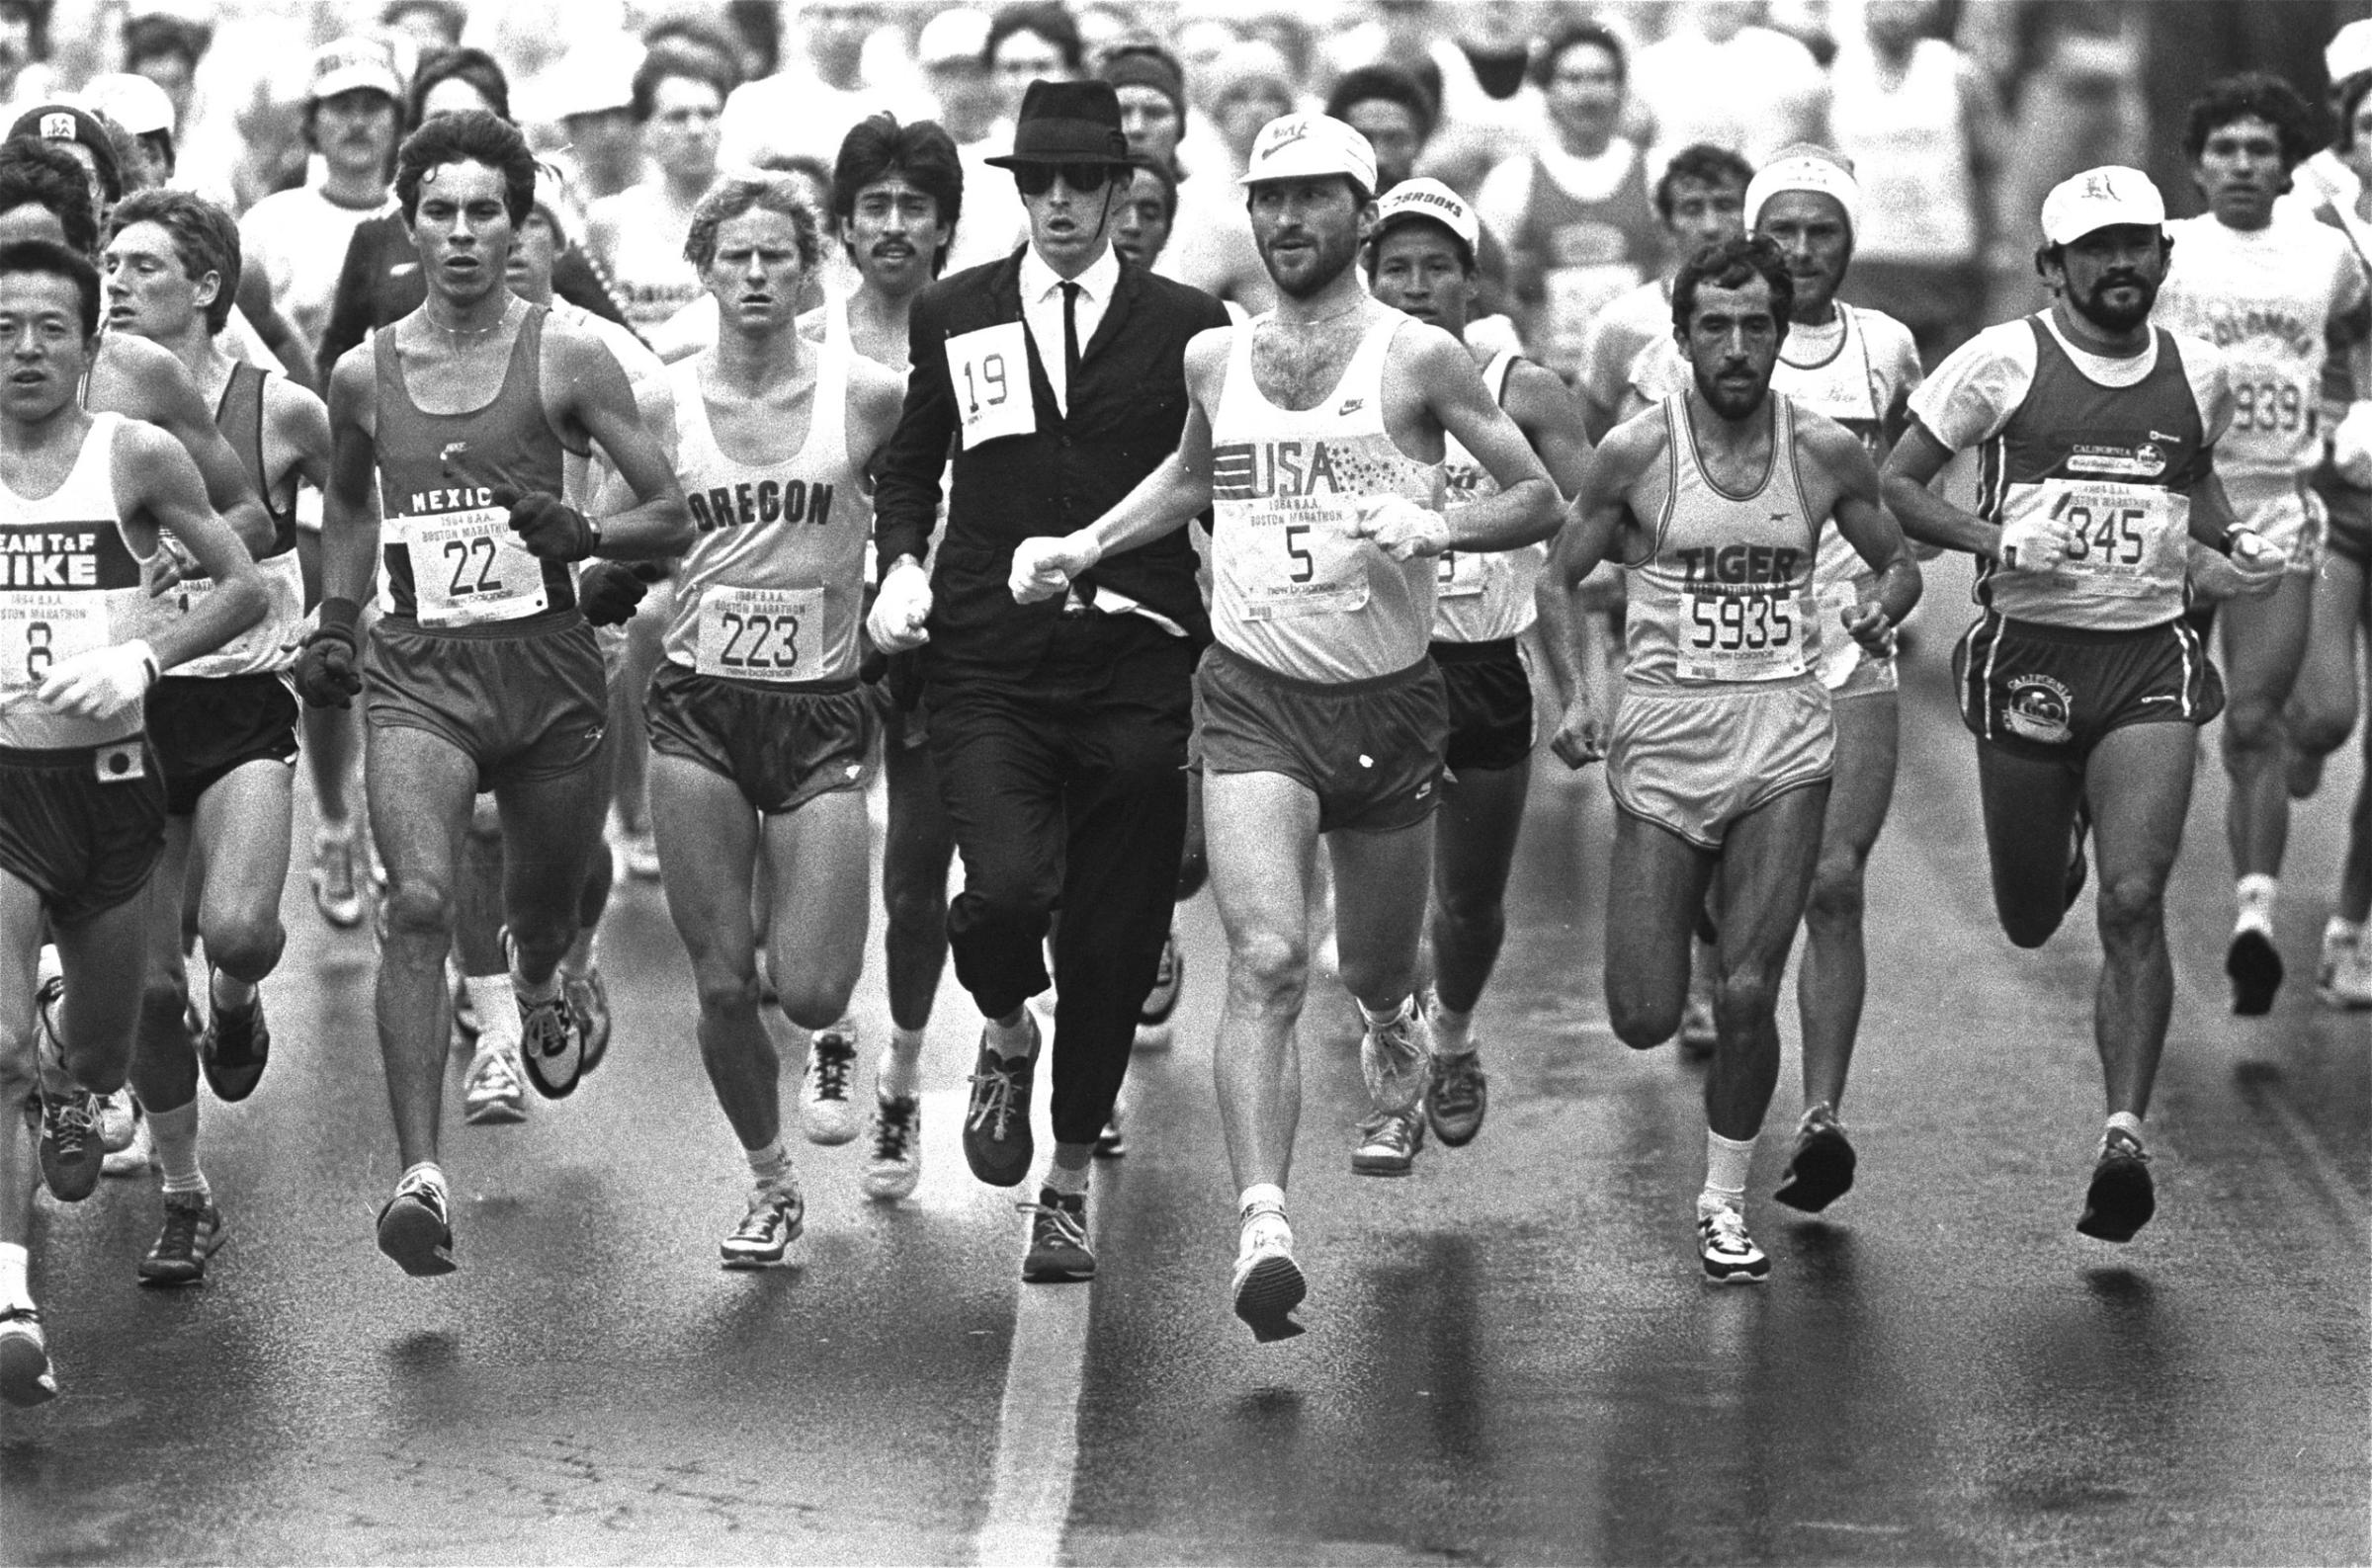 An unidentified man attired in business suit and black hat, jumped into the Boston Marathon pack Monday, April 17, 1984.